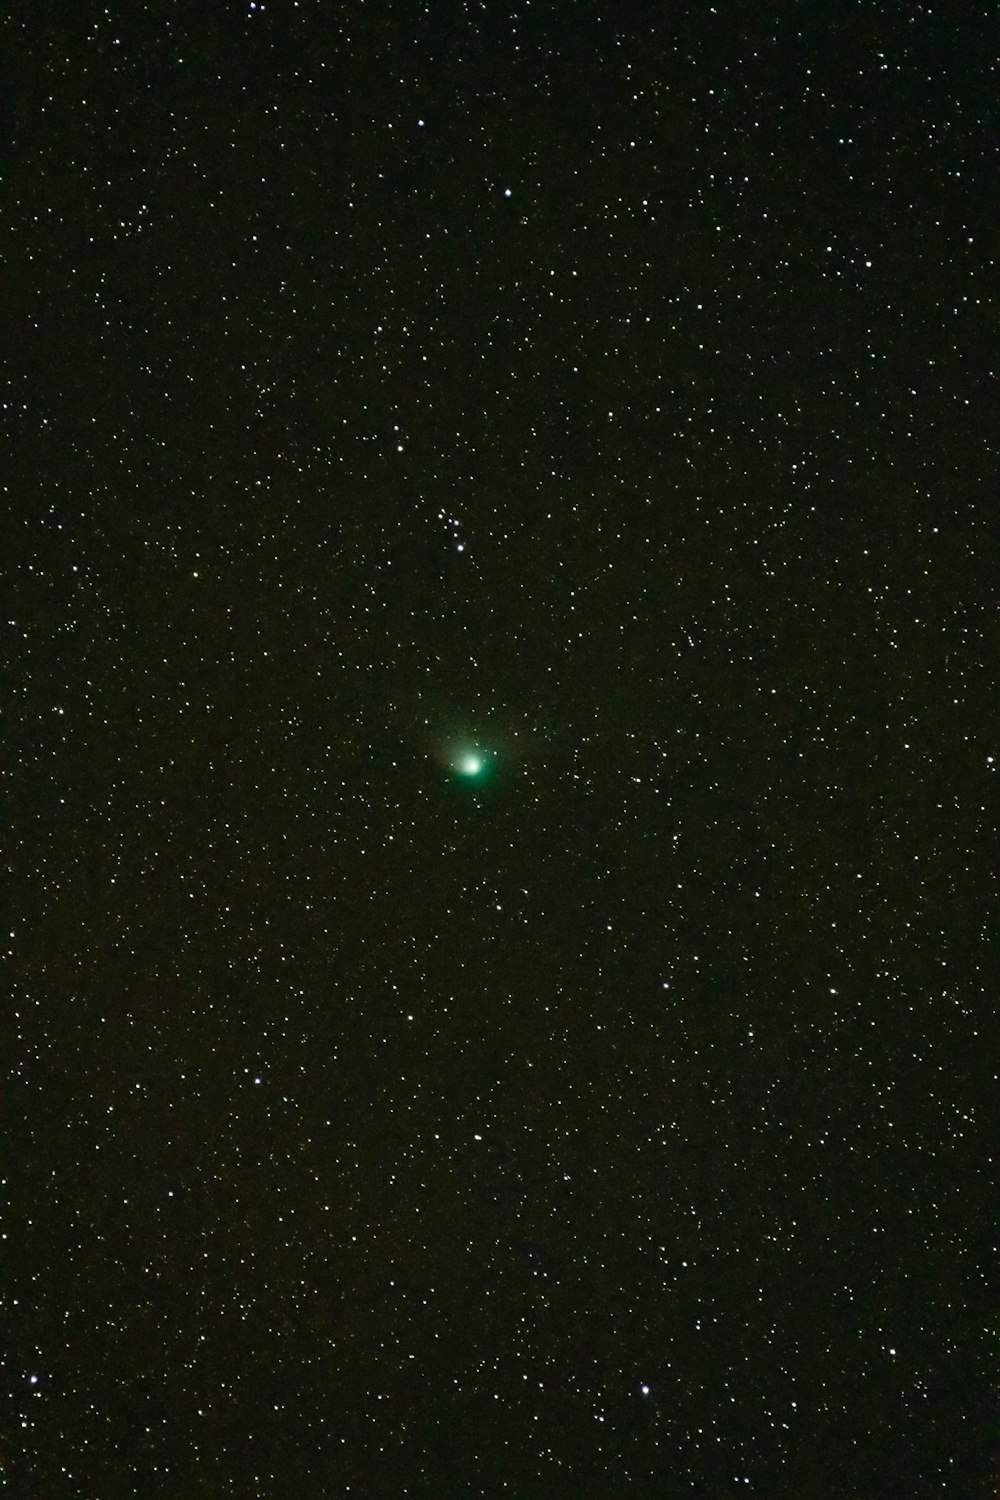 a green object is in the middle of the night sky